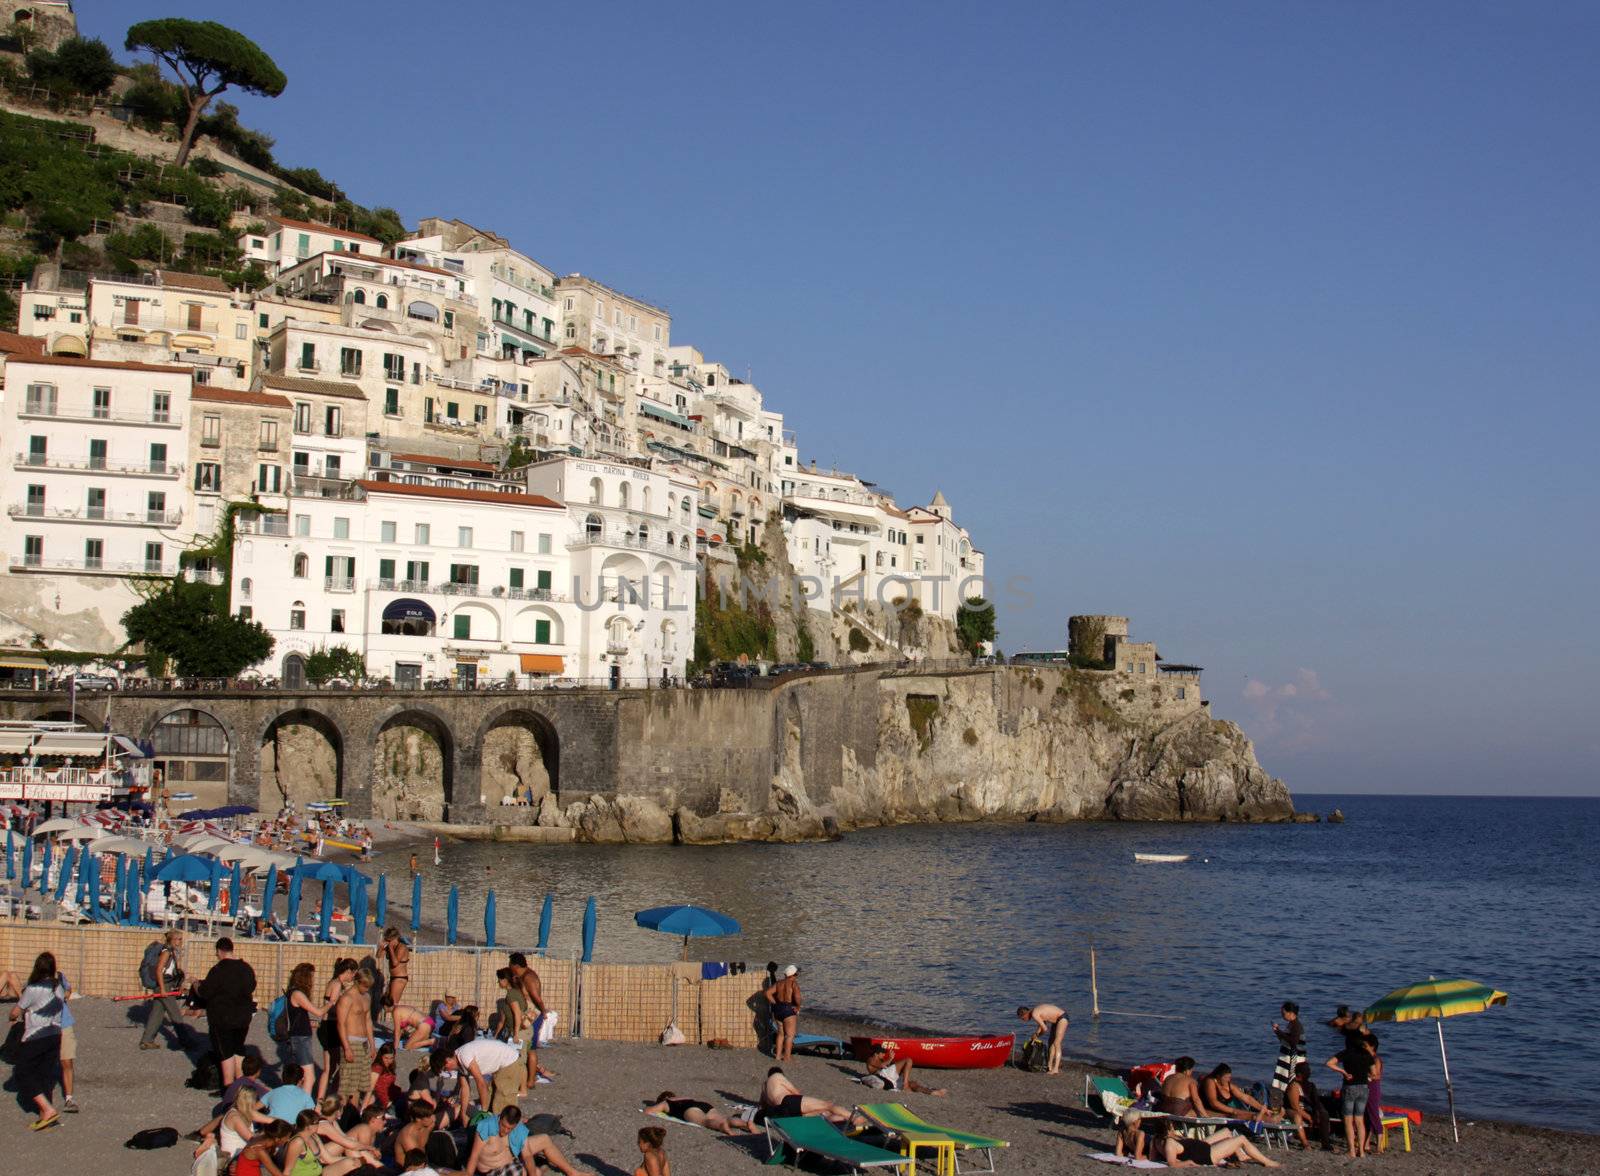 The beach in the town of Amalfi on the Amalfi coast in southern Italy.
